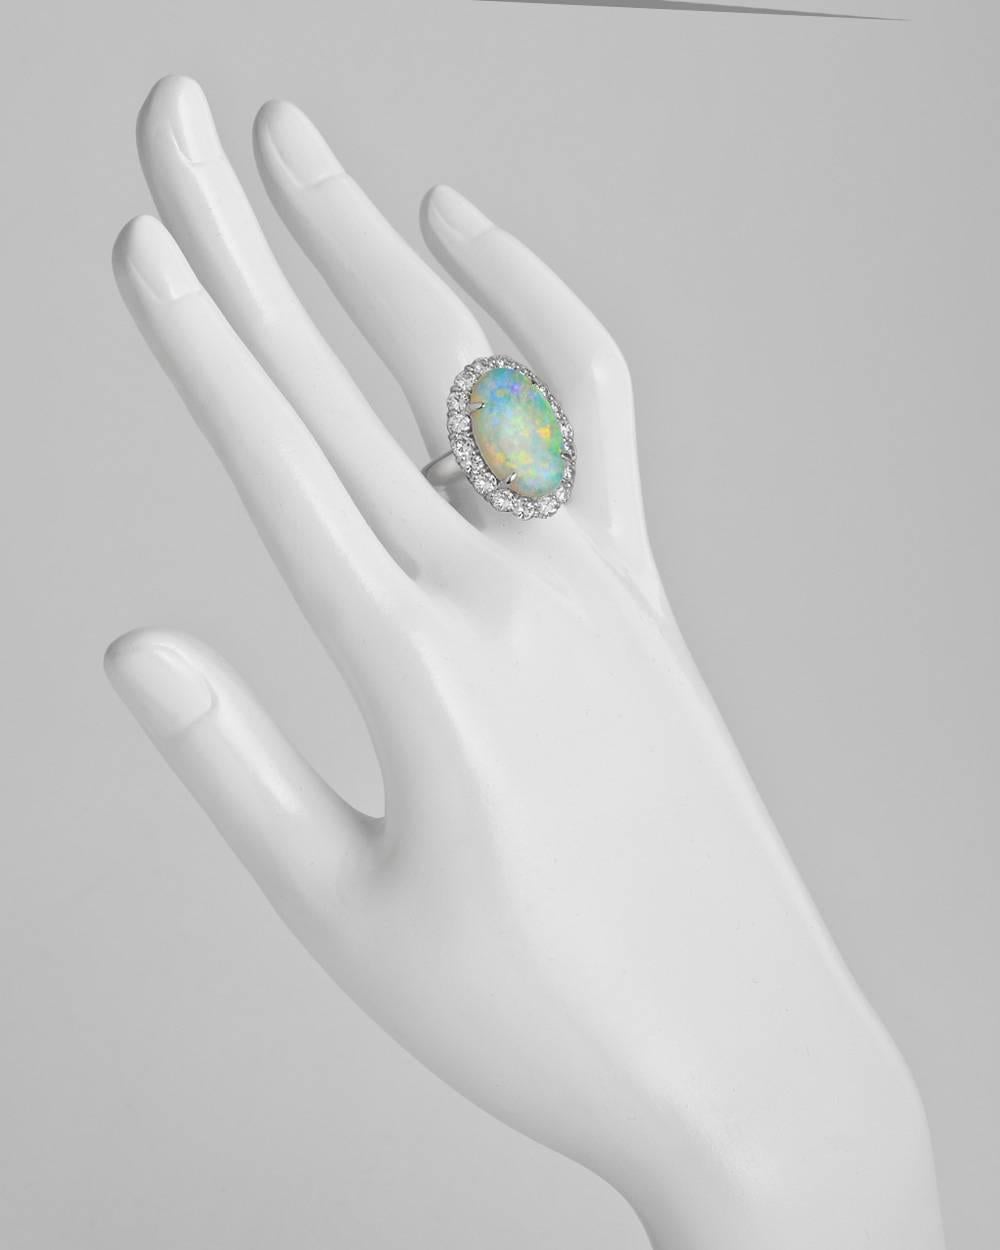 Cocktail ring, centering an oval-shaped opal weighing approximately 6.71 carats, the opal surrounded by round brilliant-cut diamonds weighing approximately 2.00 total carats, in platinum. Size 6.